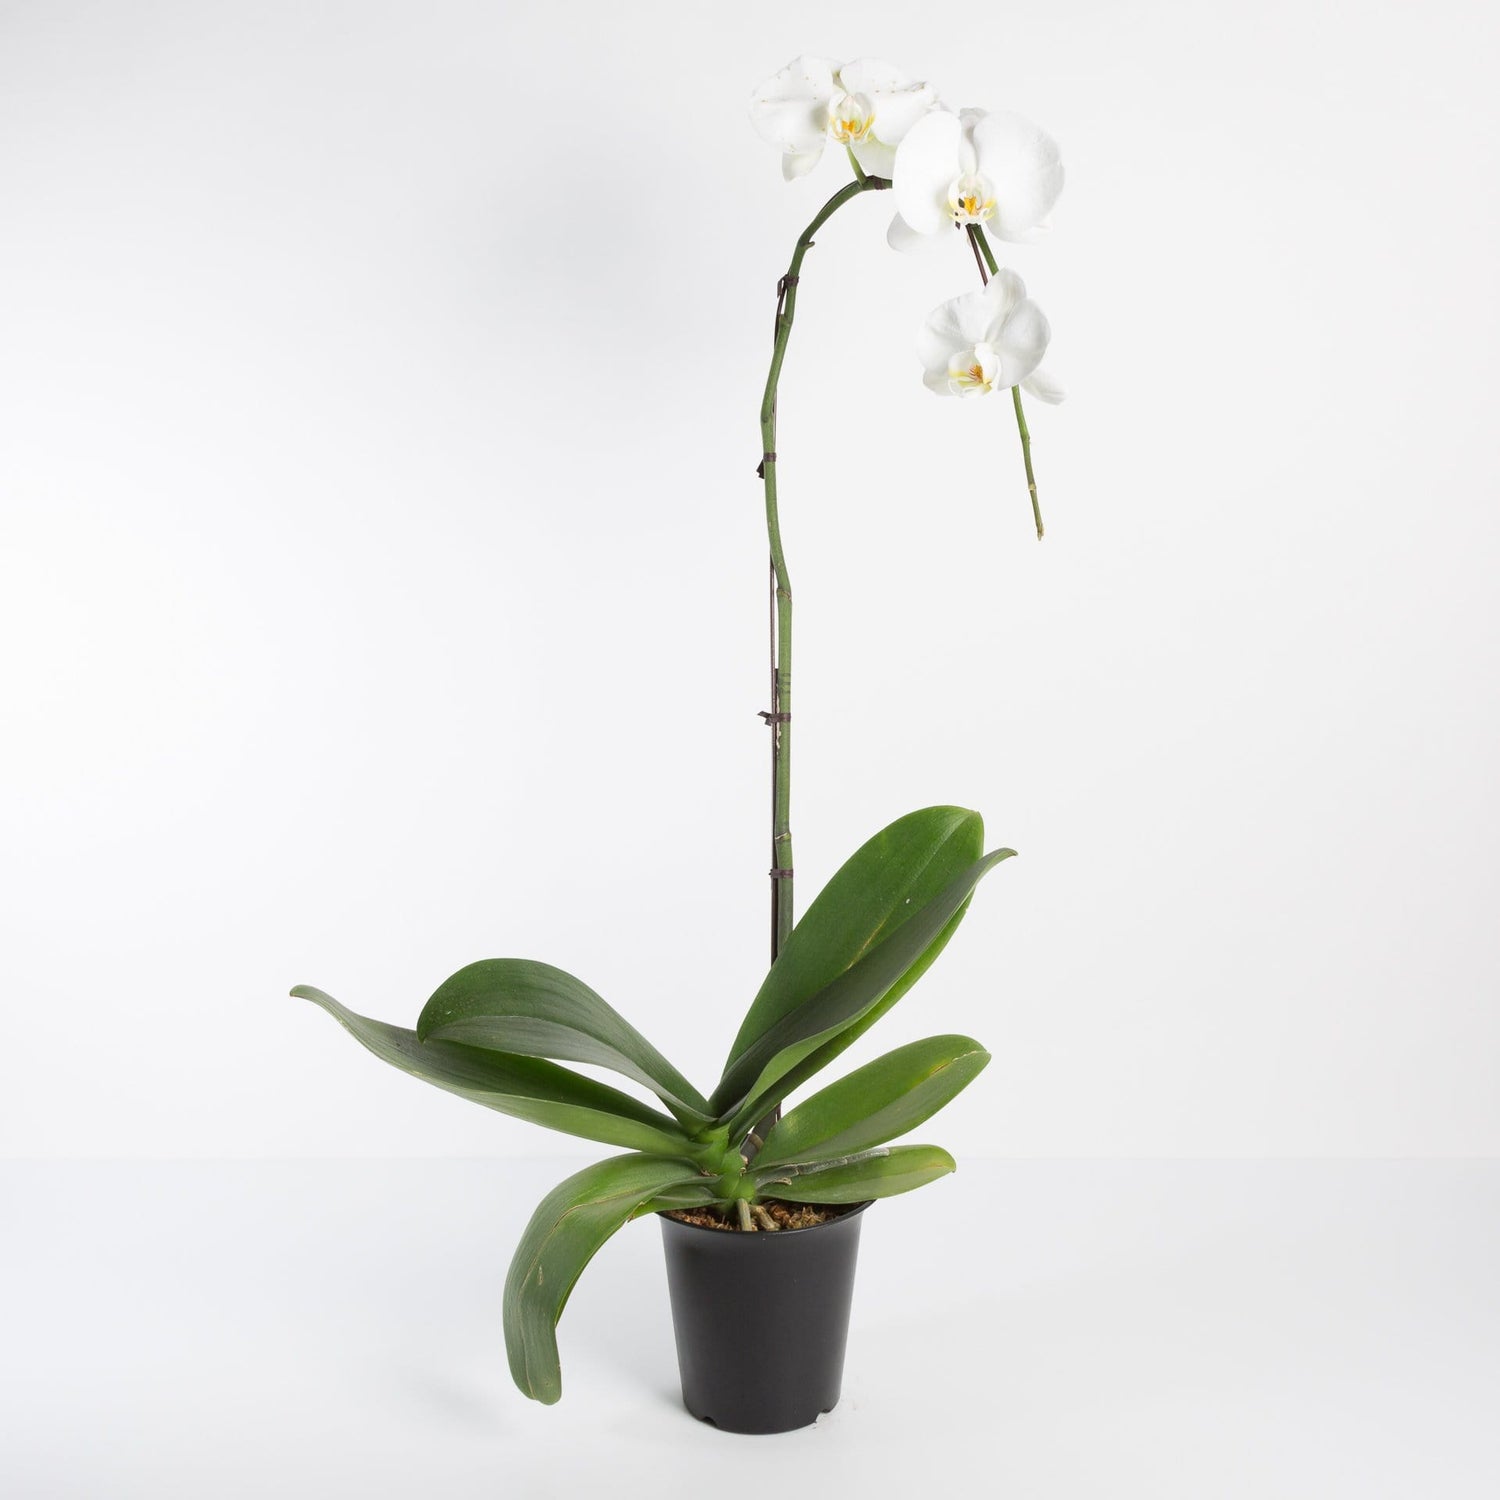 Urban Sprouts Plant 6" in nursery pot Orchid 'Moth - Phalaenopsis'